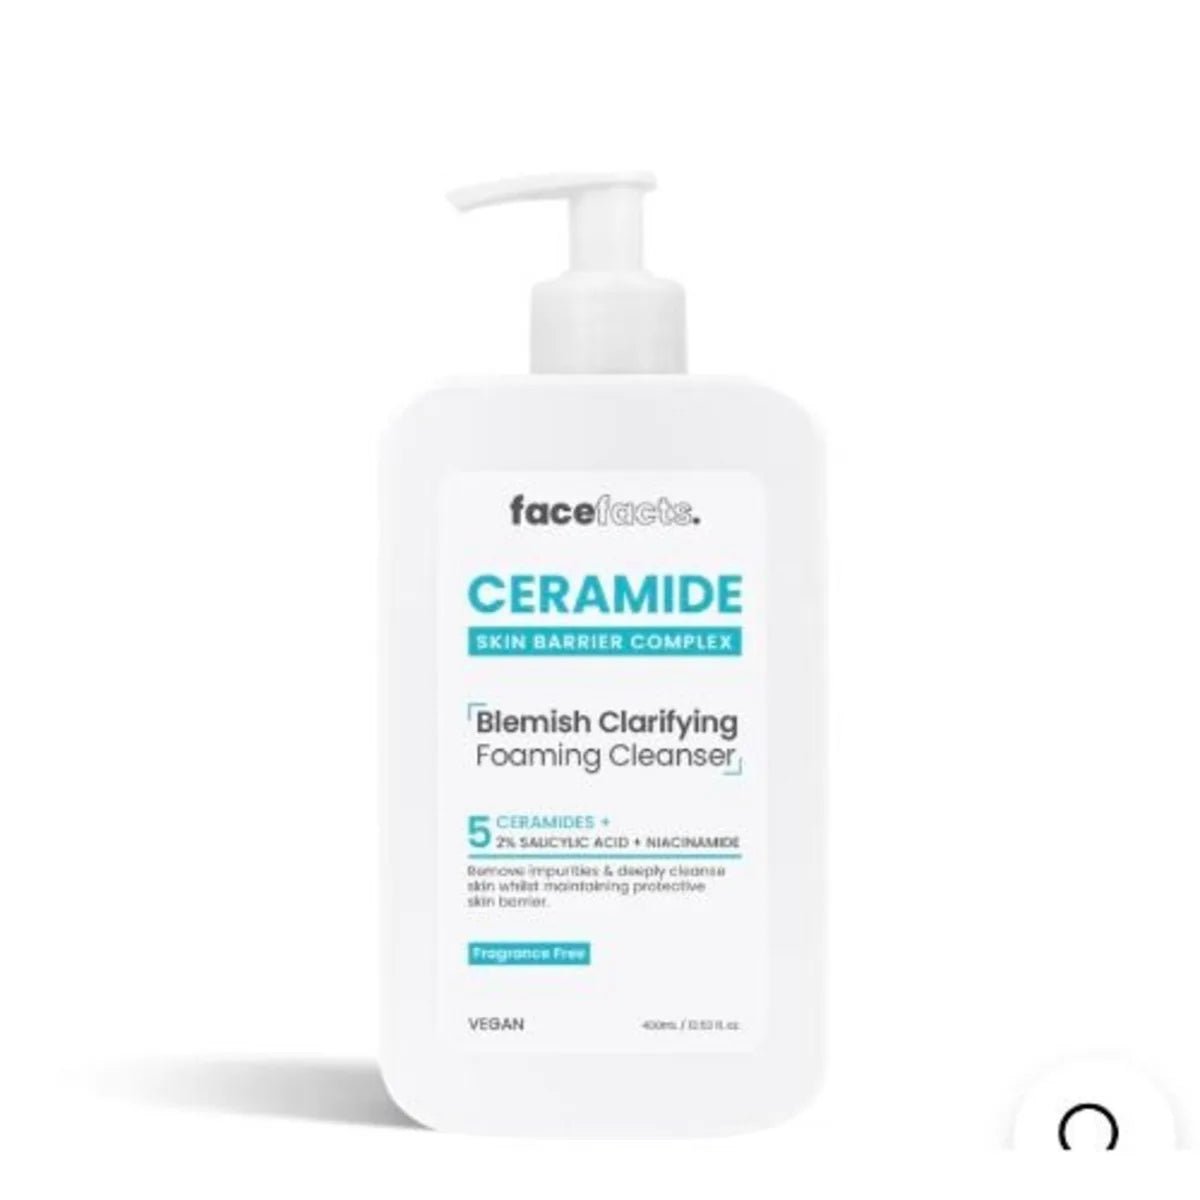 Face Facts Ceramide Skin Barrier Complex Blemish Clarifying Foaming Cleanser 400ml